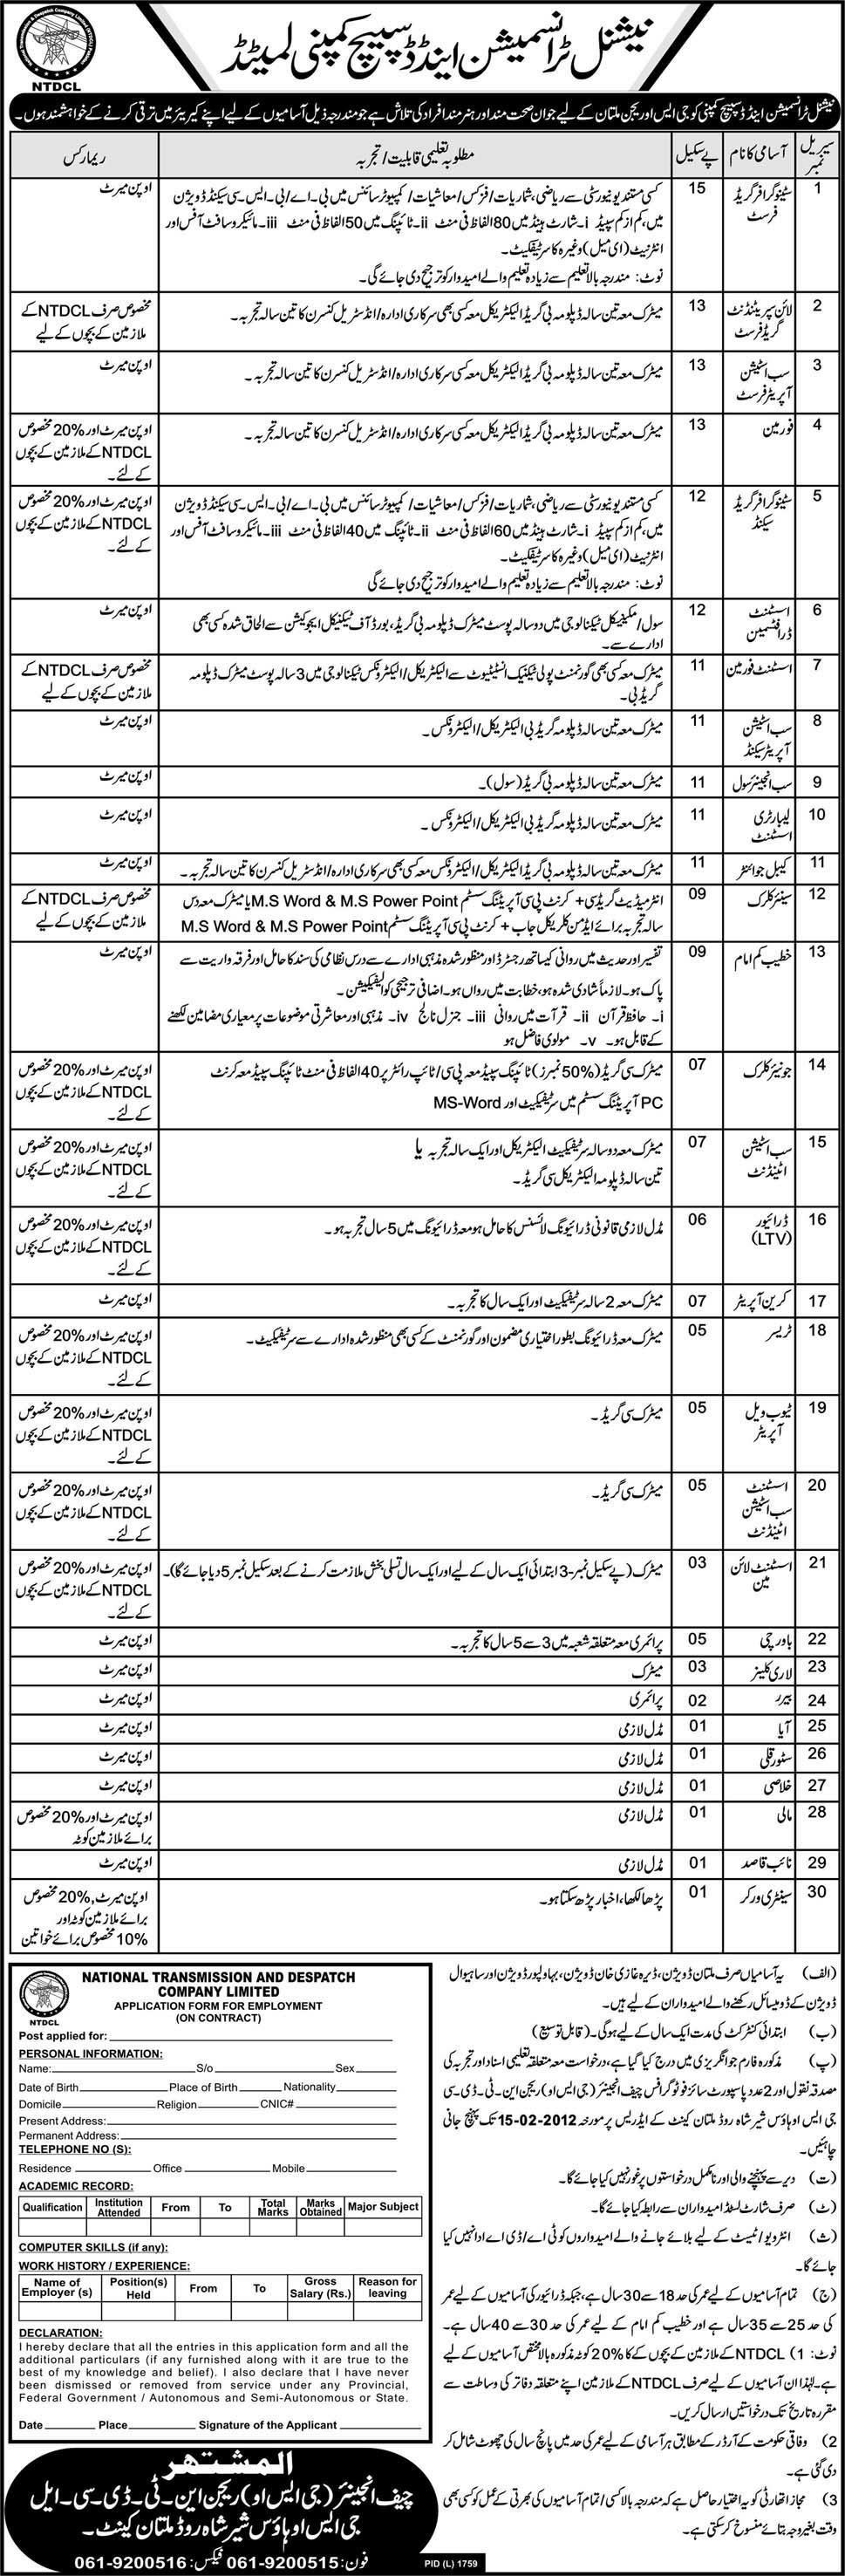 National Transmission and Dispatch Company Ltd Jobs Opportunity